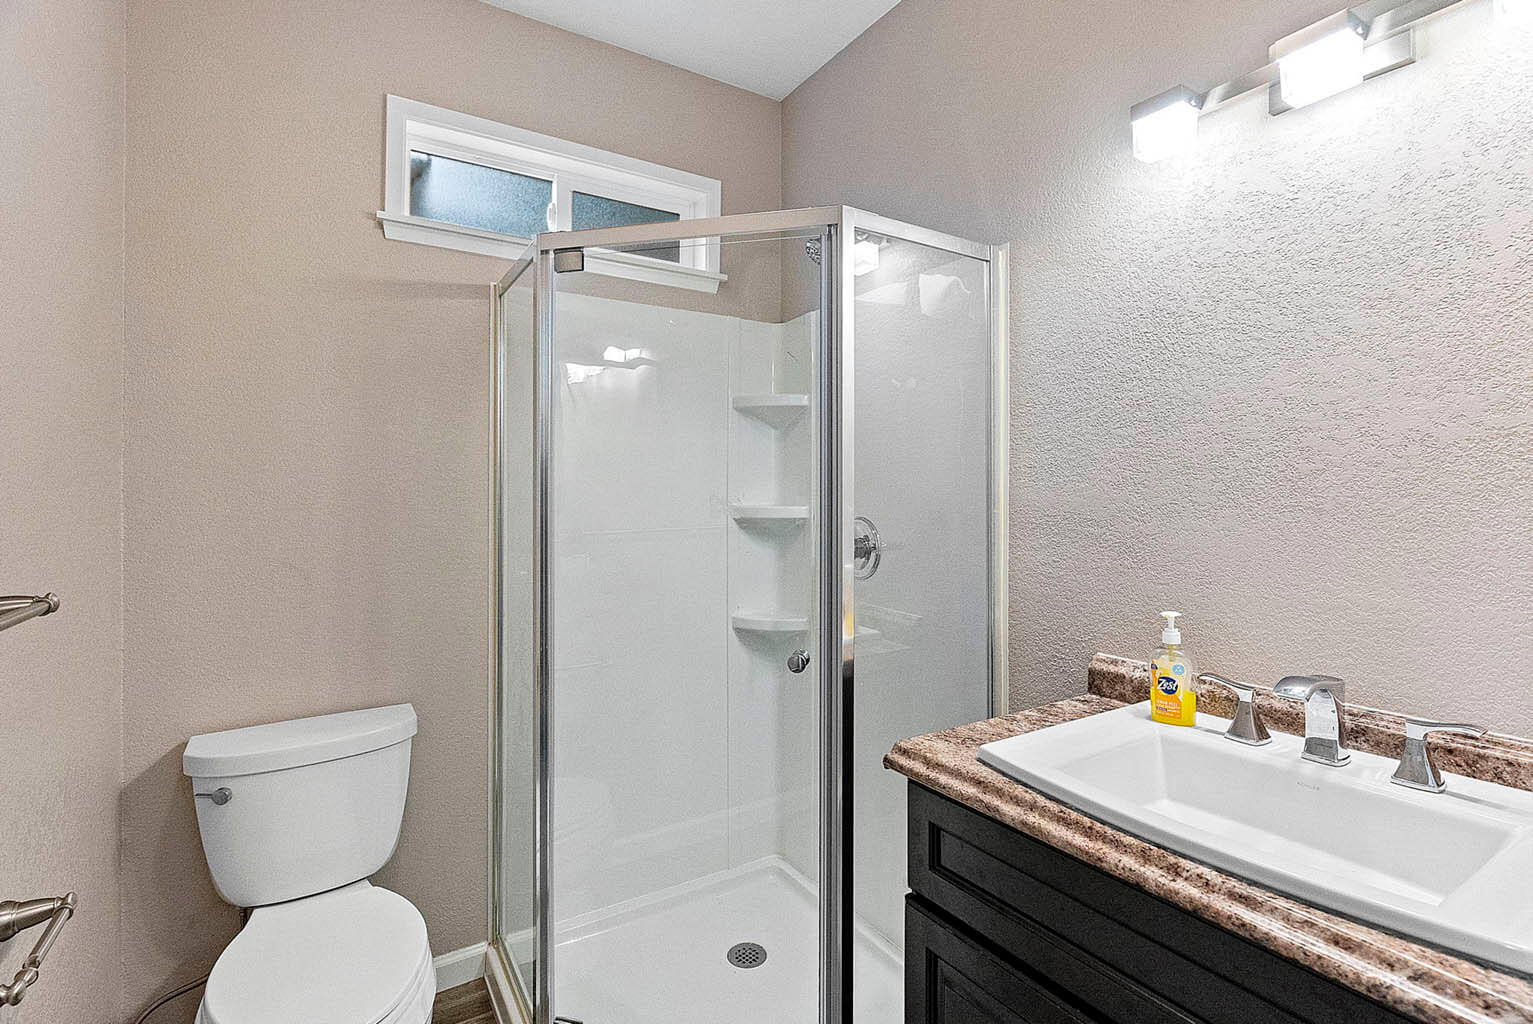 Guest apartment includes a bathroom with shower